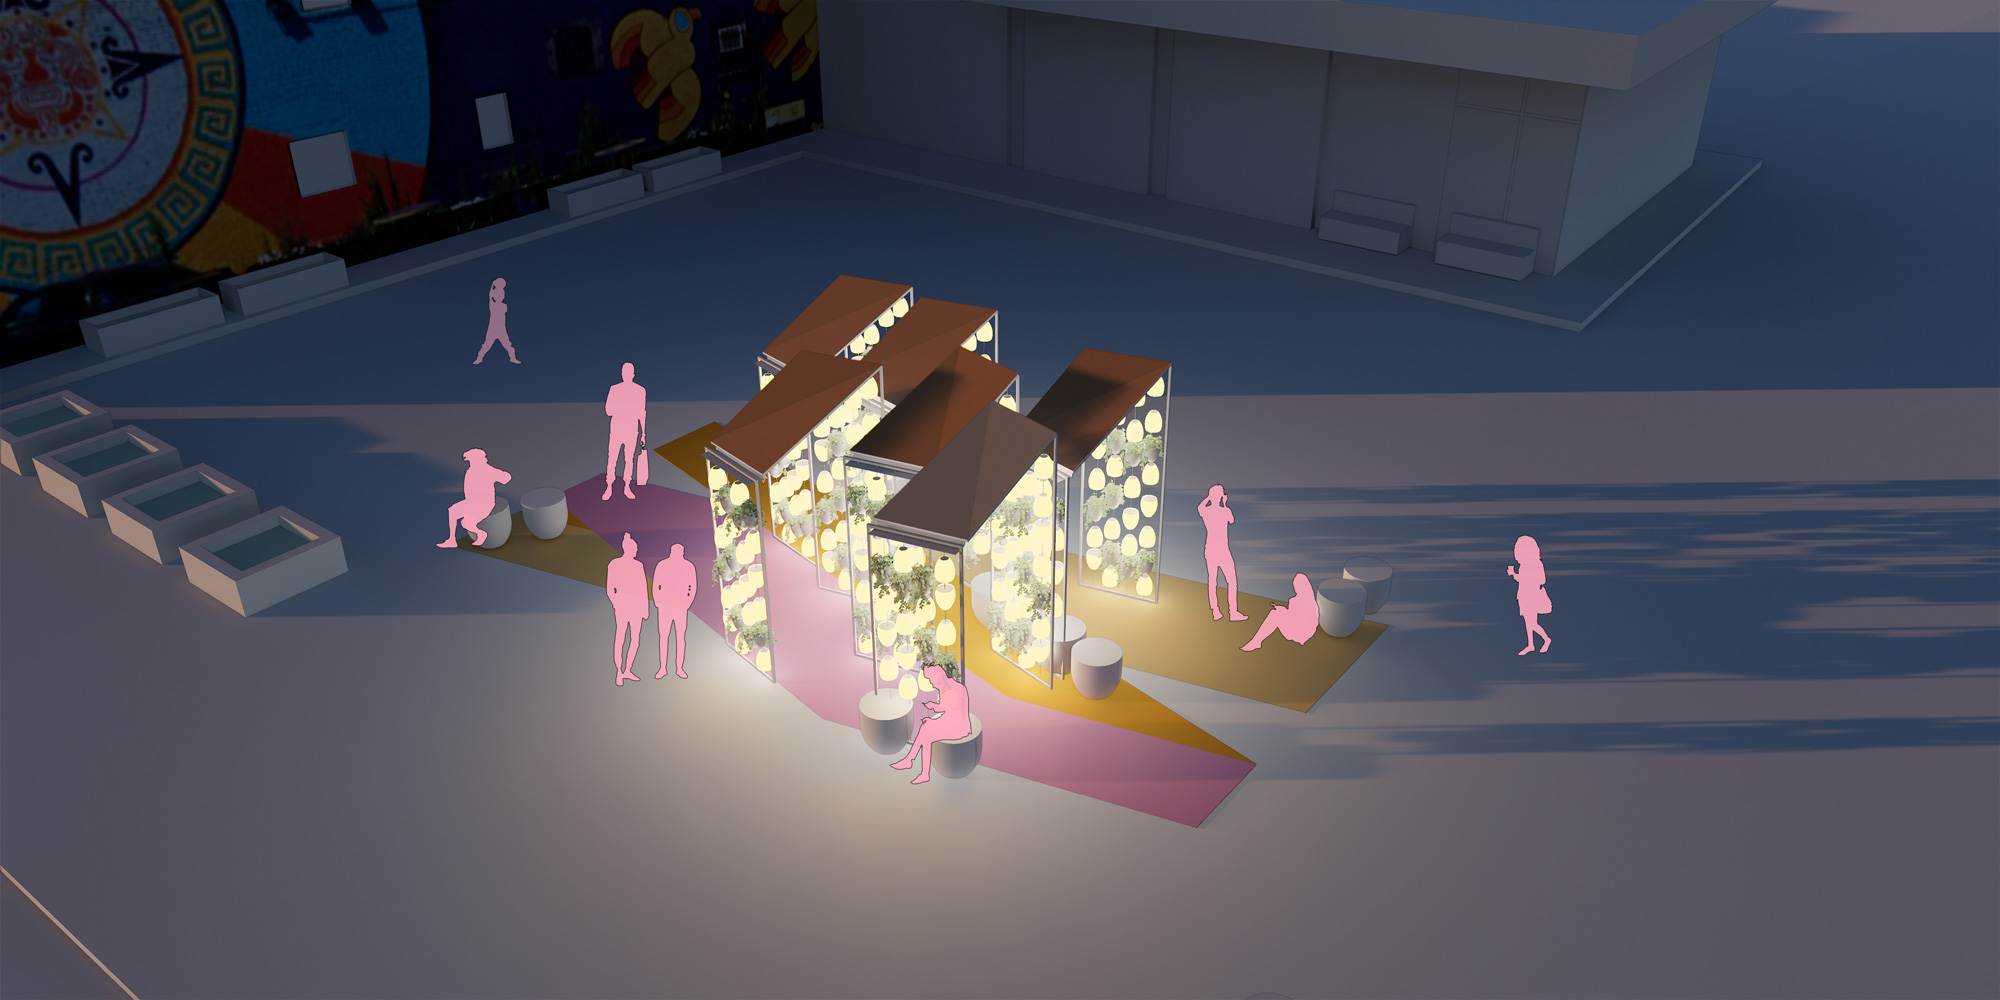 Rendering of abstracted pink people below a lit-up cluster of canopies, a winner of the Detroit City of Design Competition